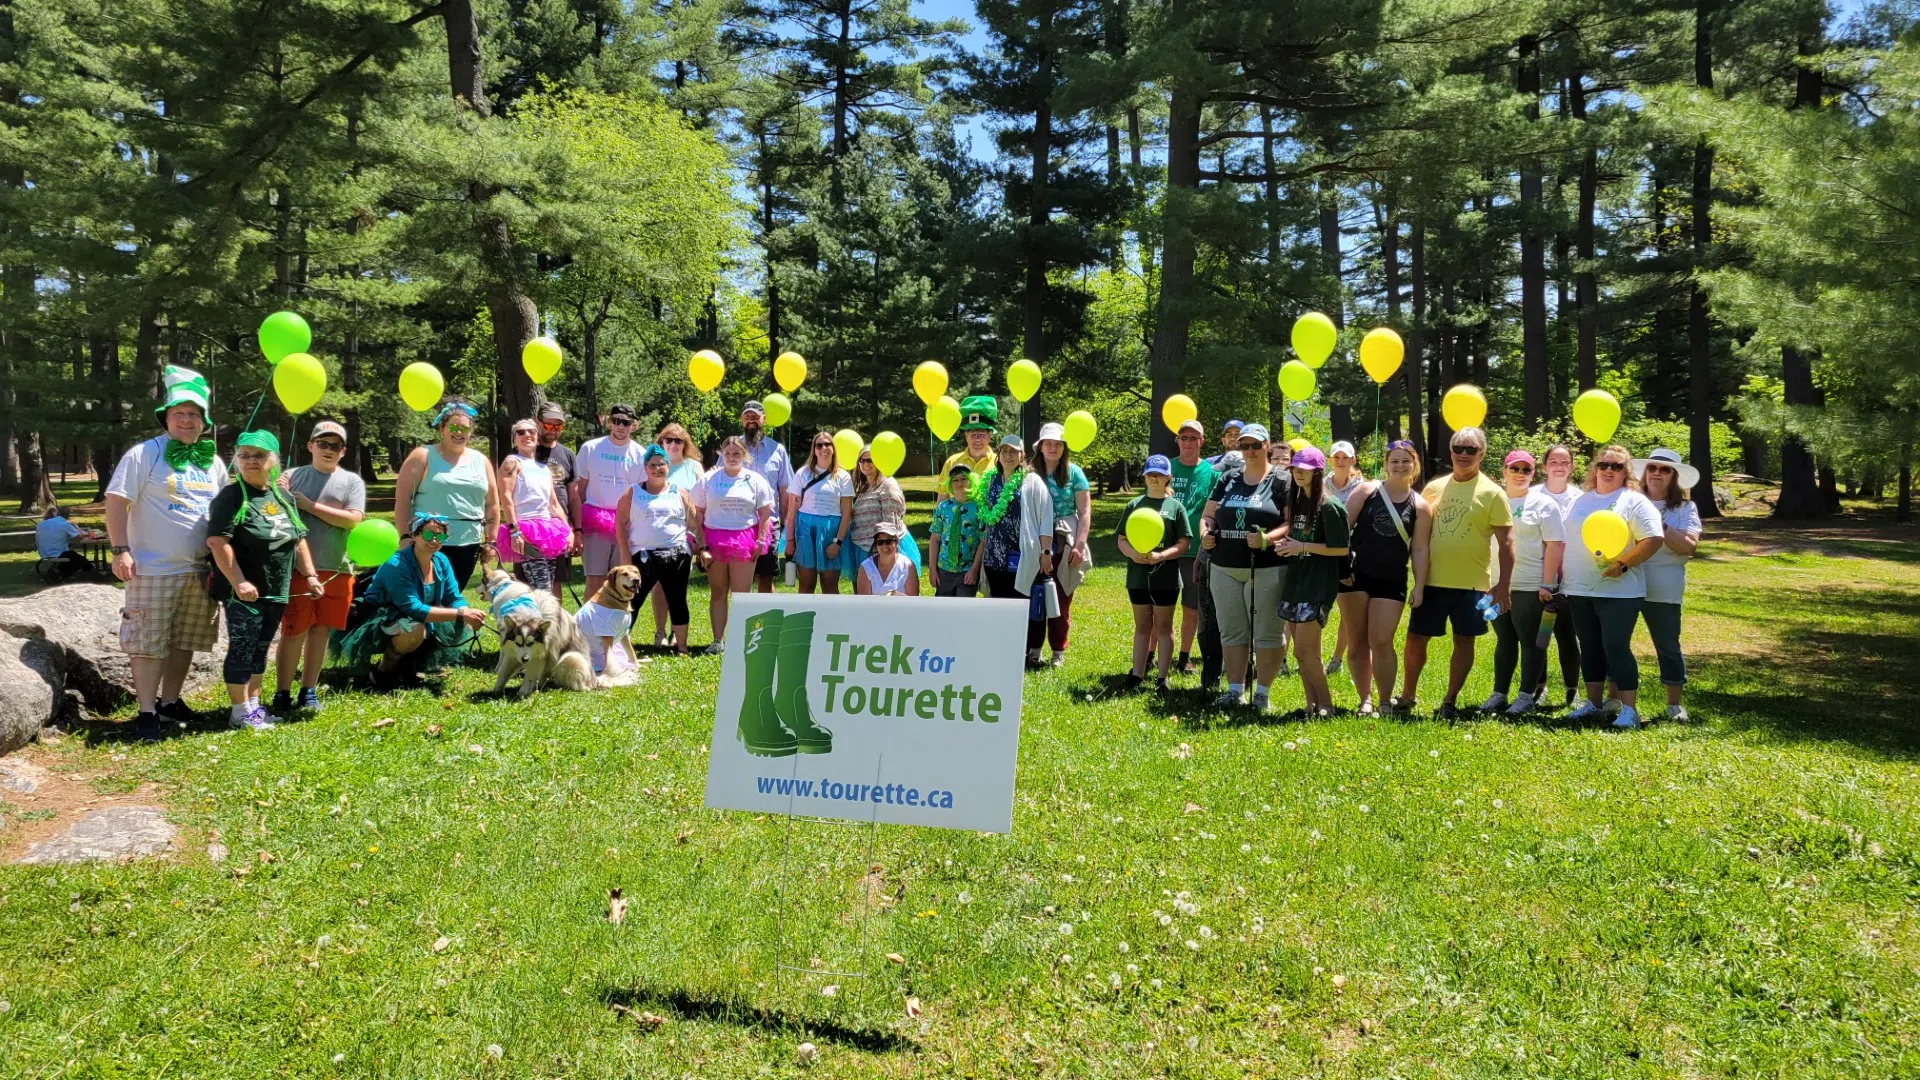 16th Annual Trek for Tourette Happening May 26th